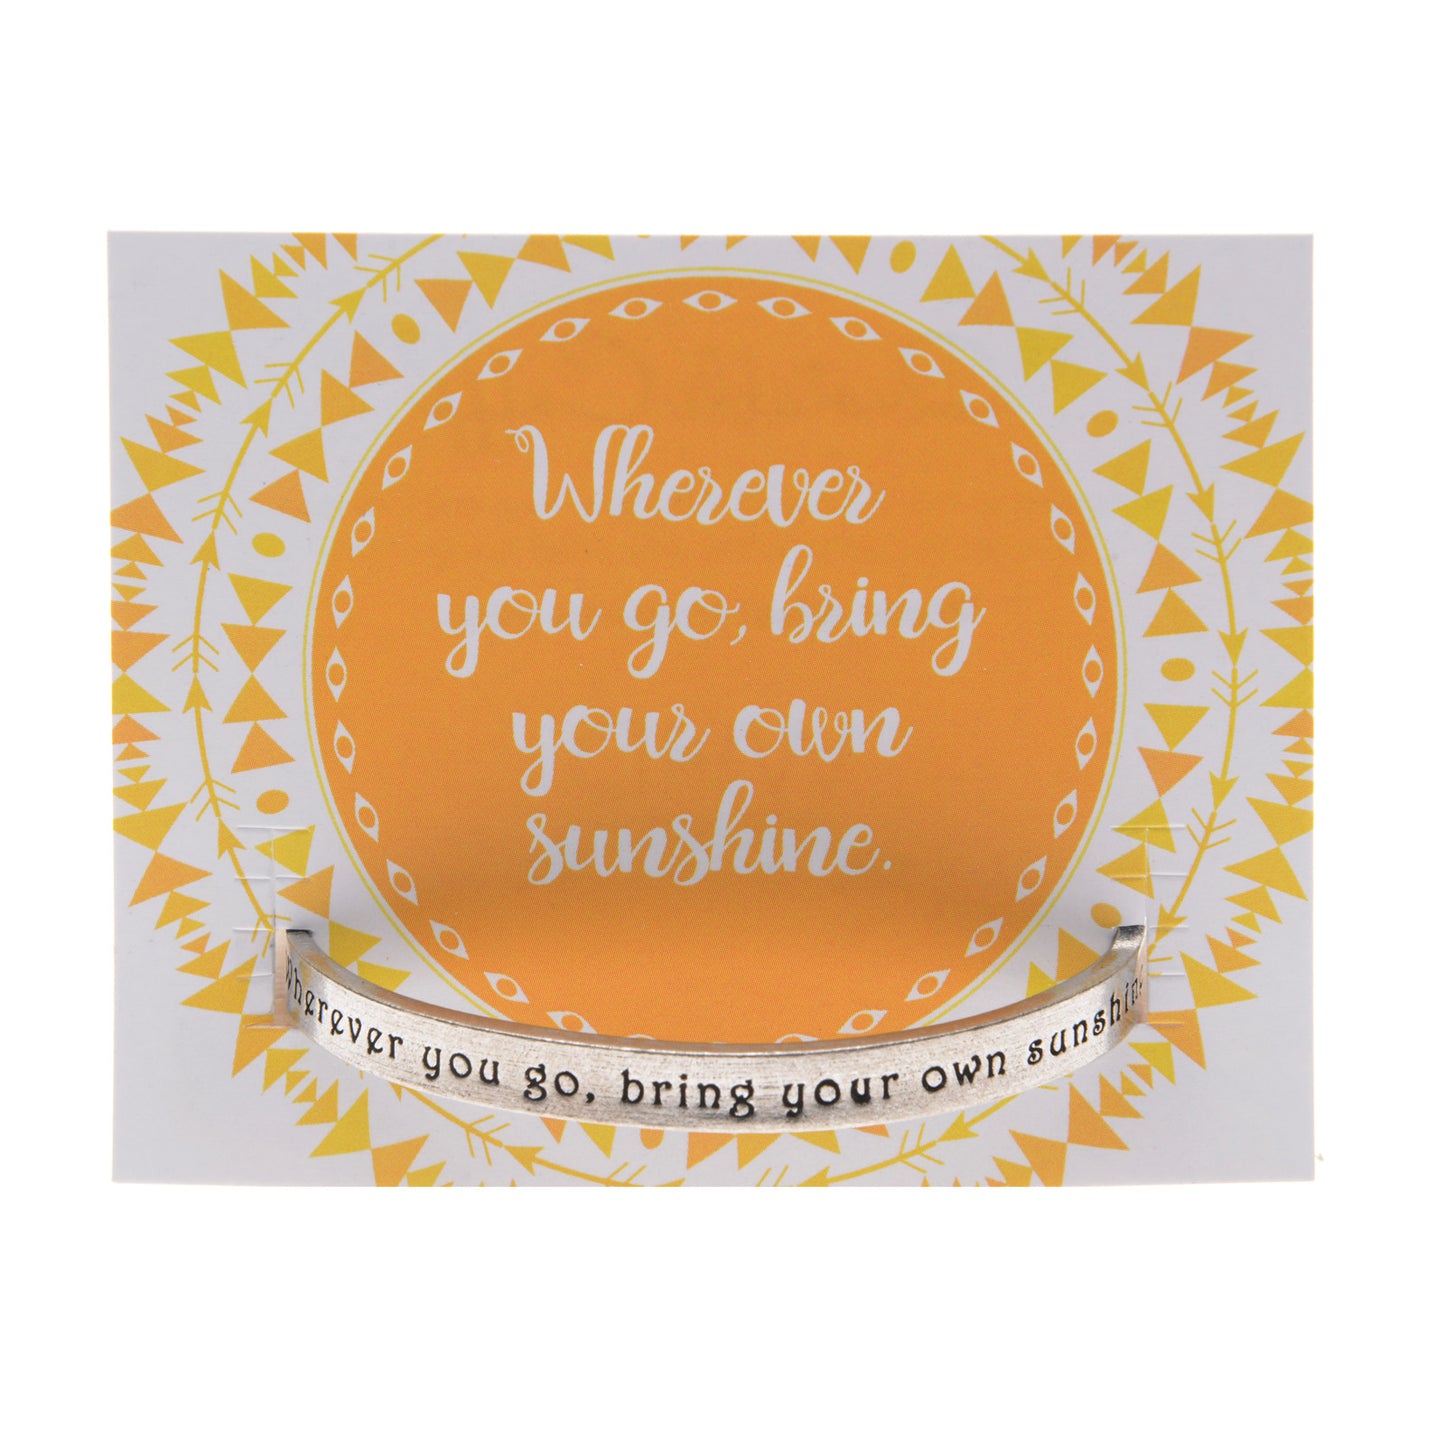 Wherever You Go, Always Bring Your Own Sunshine Quotable Cuff Bracelet on backer card